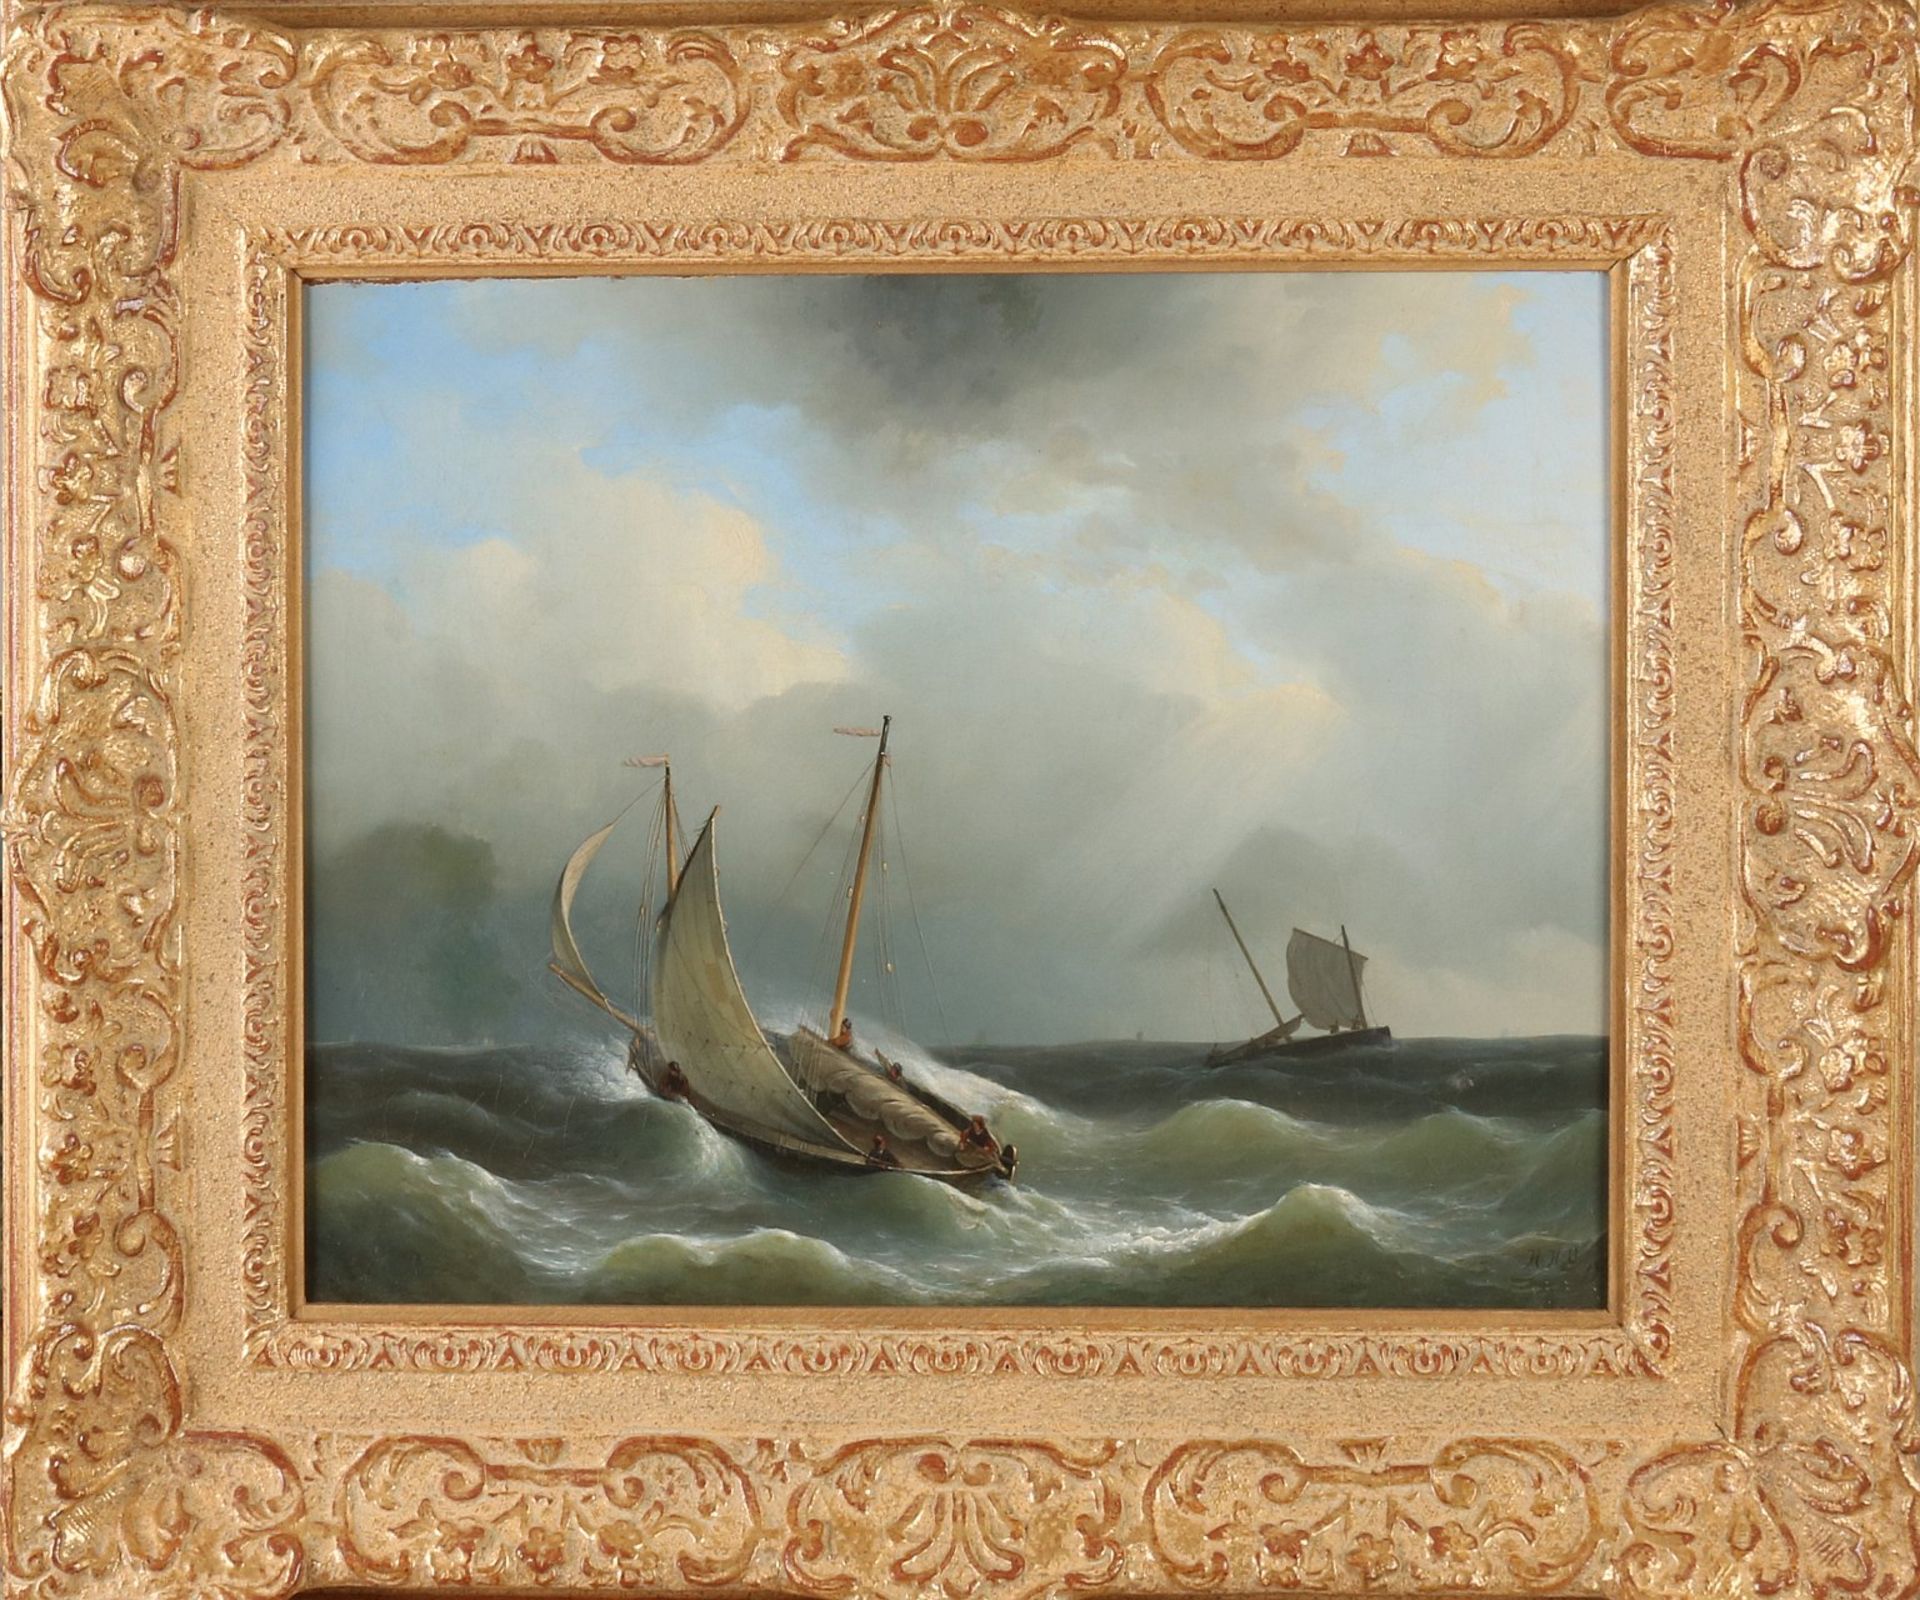 Herman H. Op der Heijde, Sailing ship with figures on the high seas